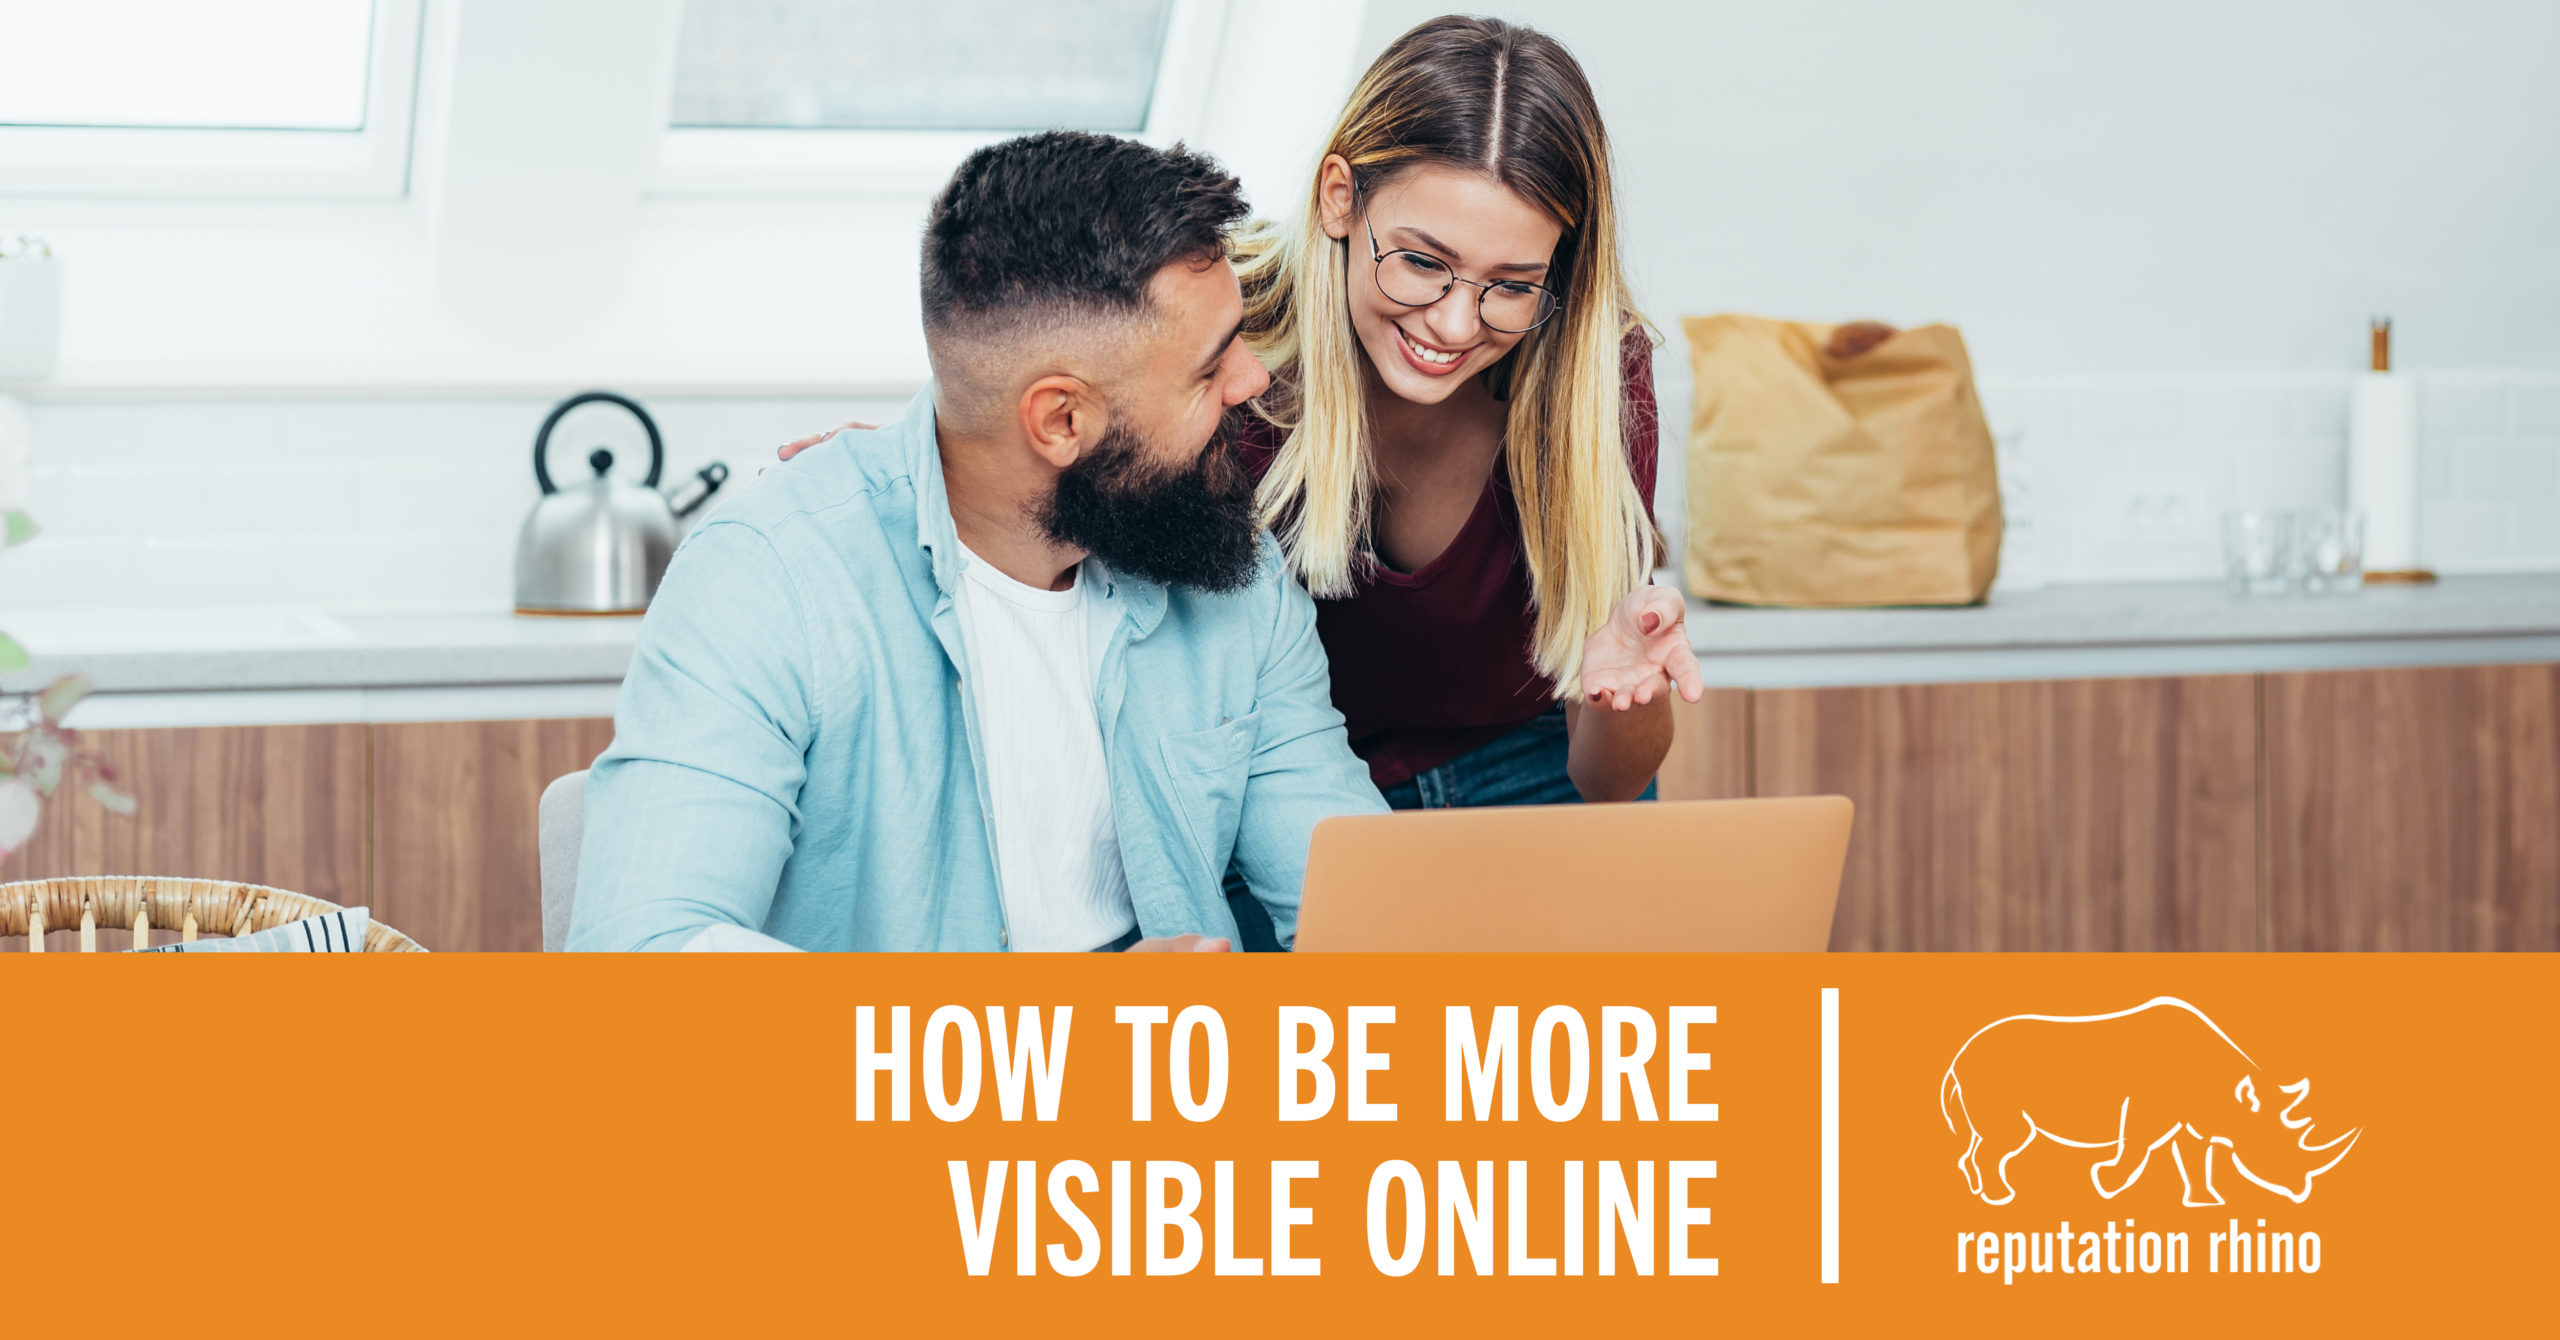 Visible online - man and woman looking at laptop